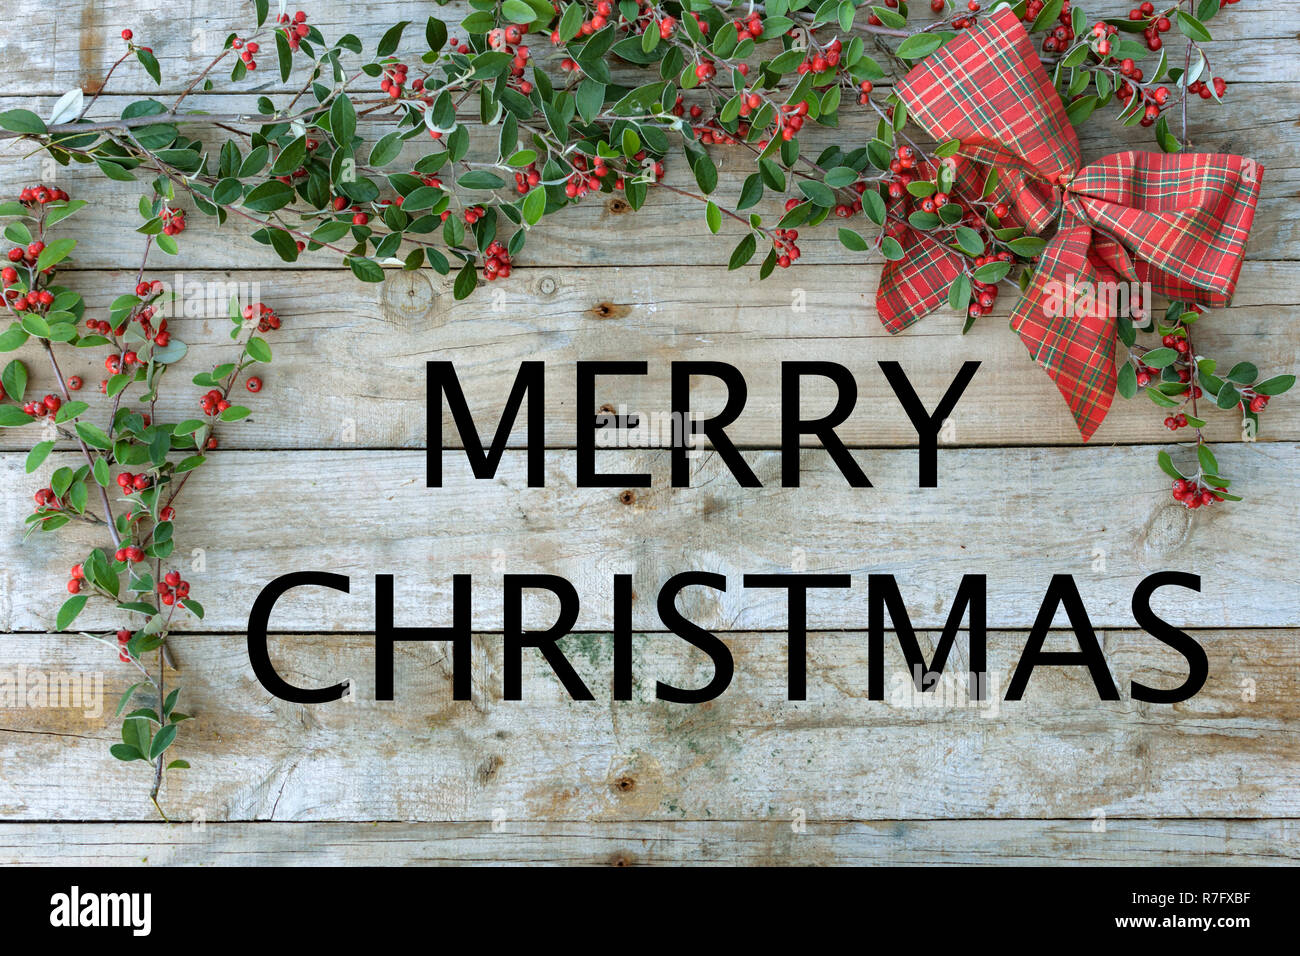 Christmas wallpaper, greetings card. Green foliage with berries with a red checked tie on wooden panel. "Merry Christmas" Stock Photo